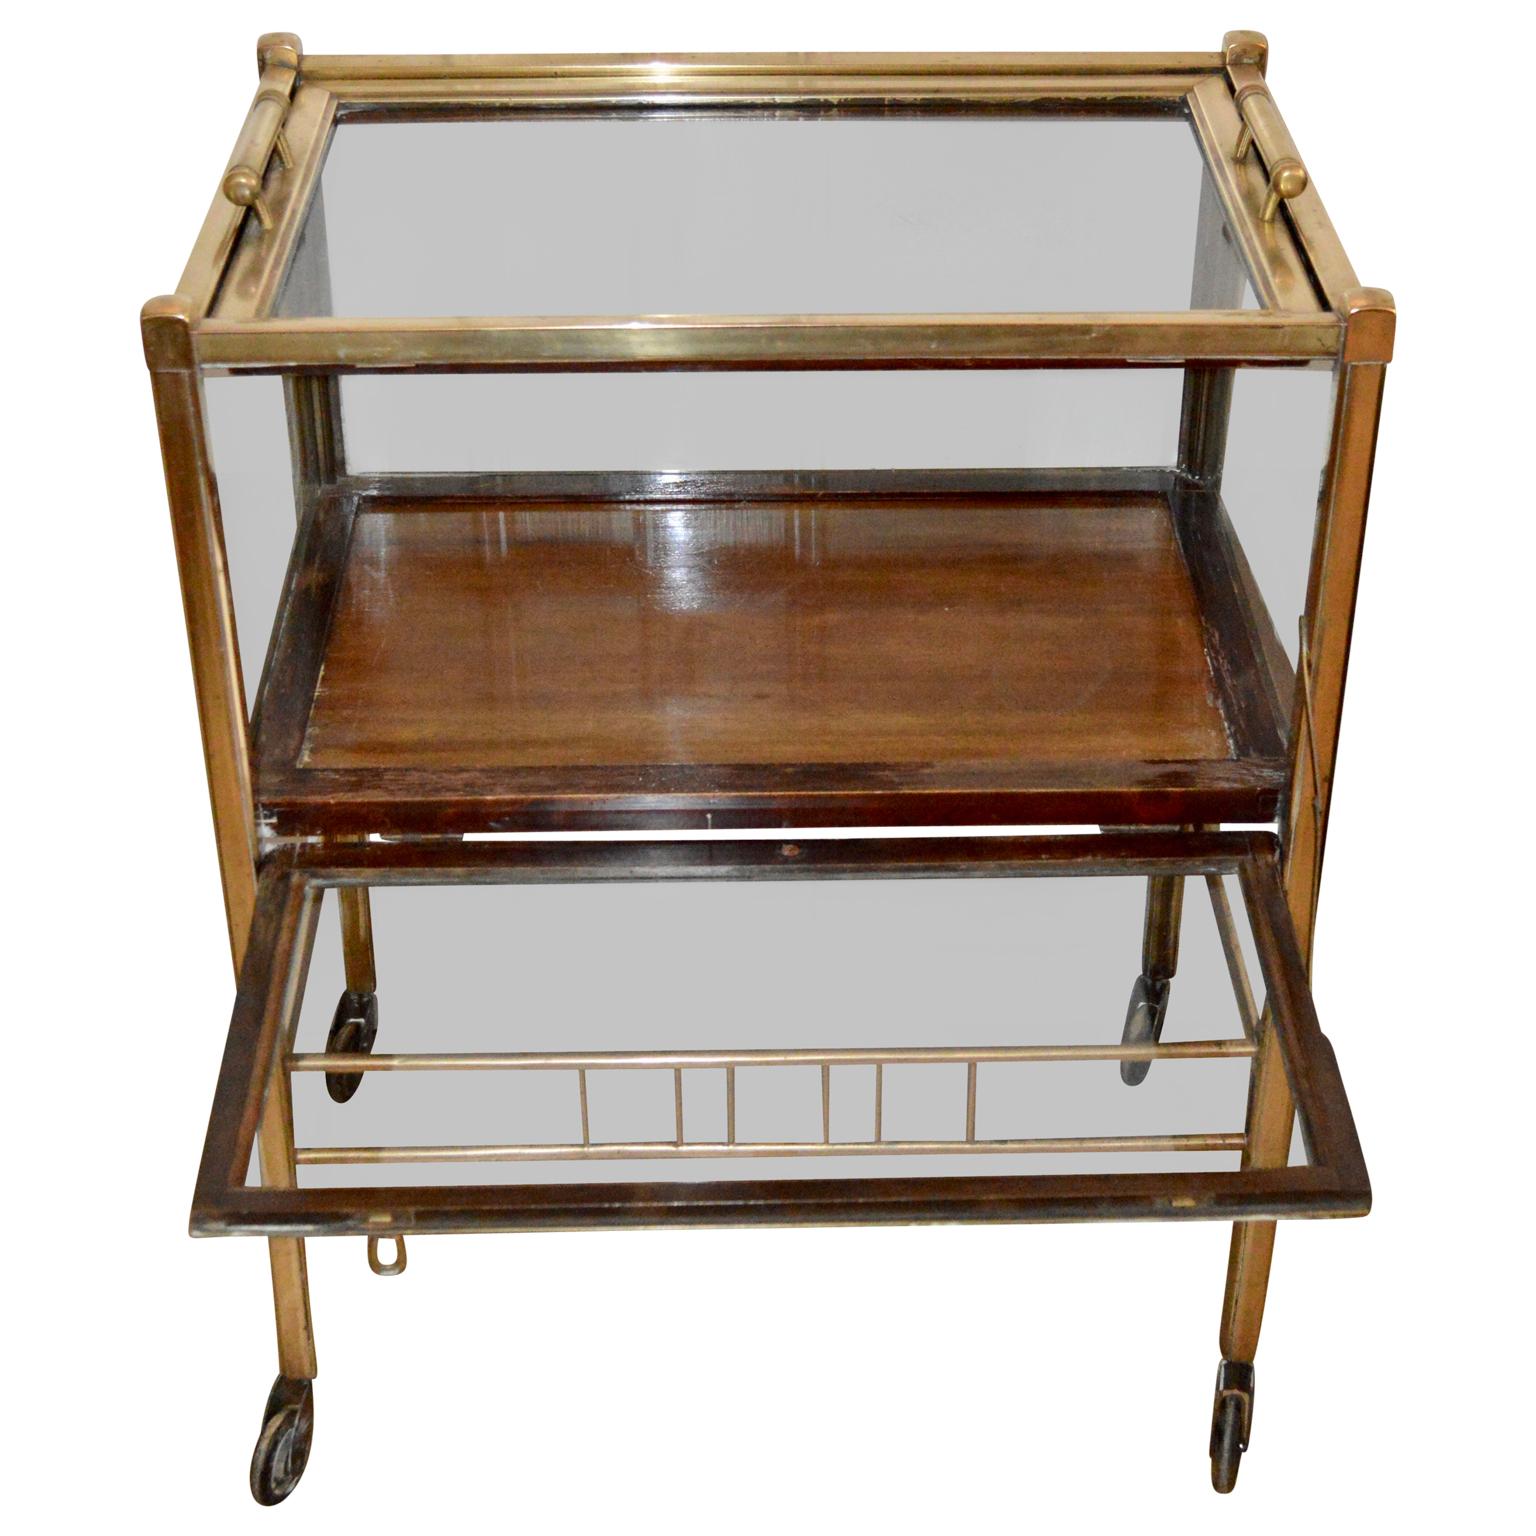 Beveled Art Deco Brass And Wood Bar Cart Trolley By Ernst Rockhausen, Germany, 1920s